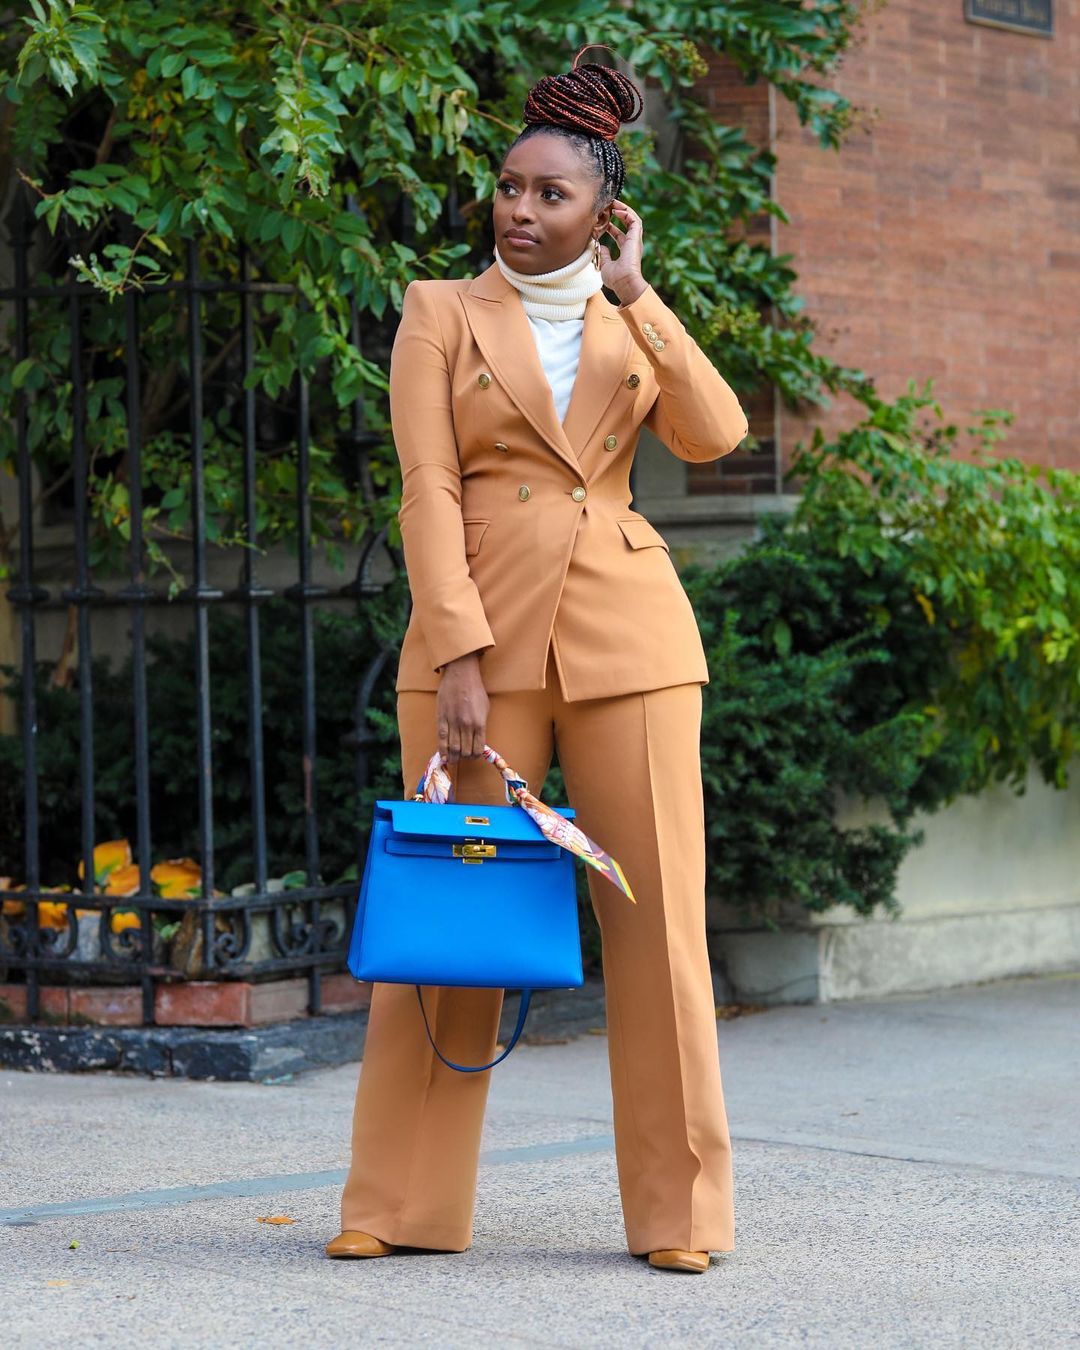 You'll Feel Like A Boss When You Wear These Chic Style Inspos To Work #Fashion101 